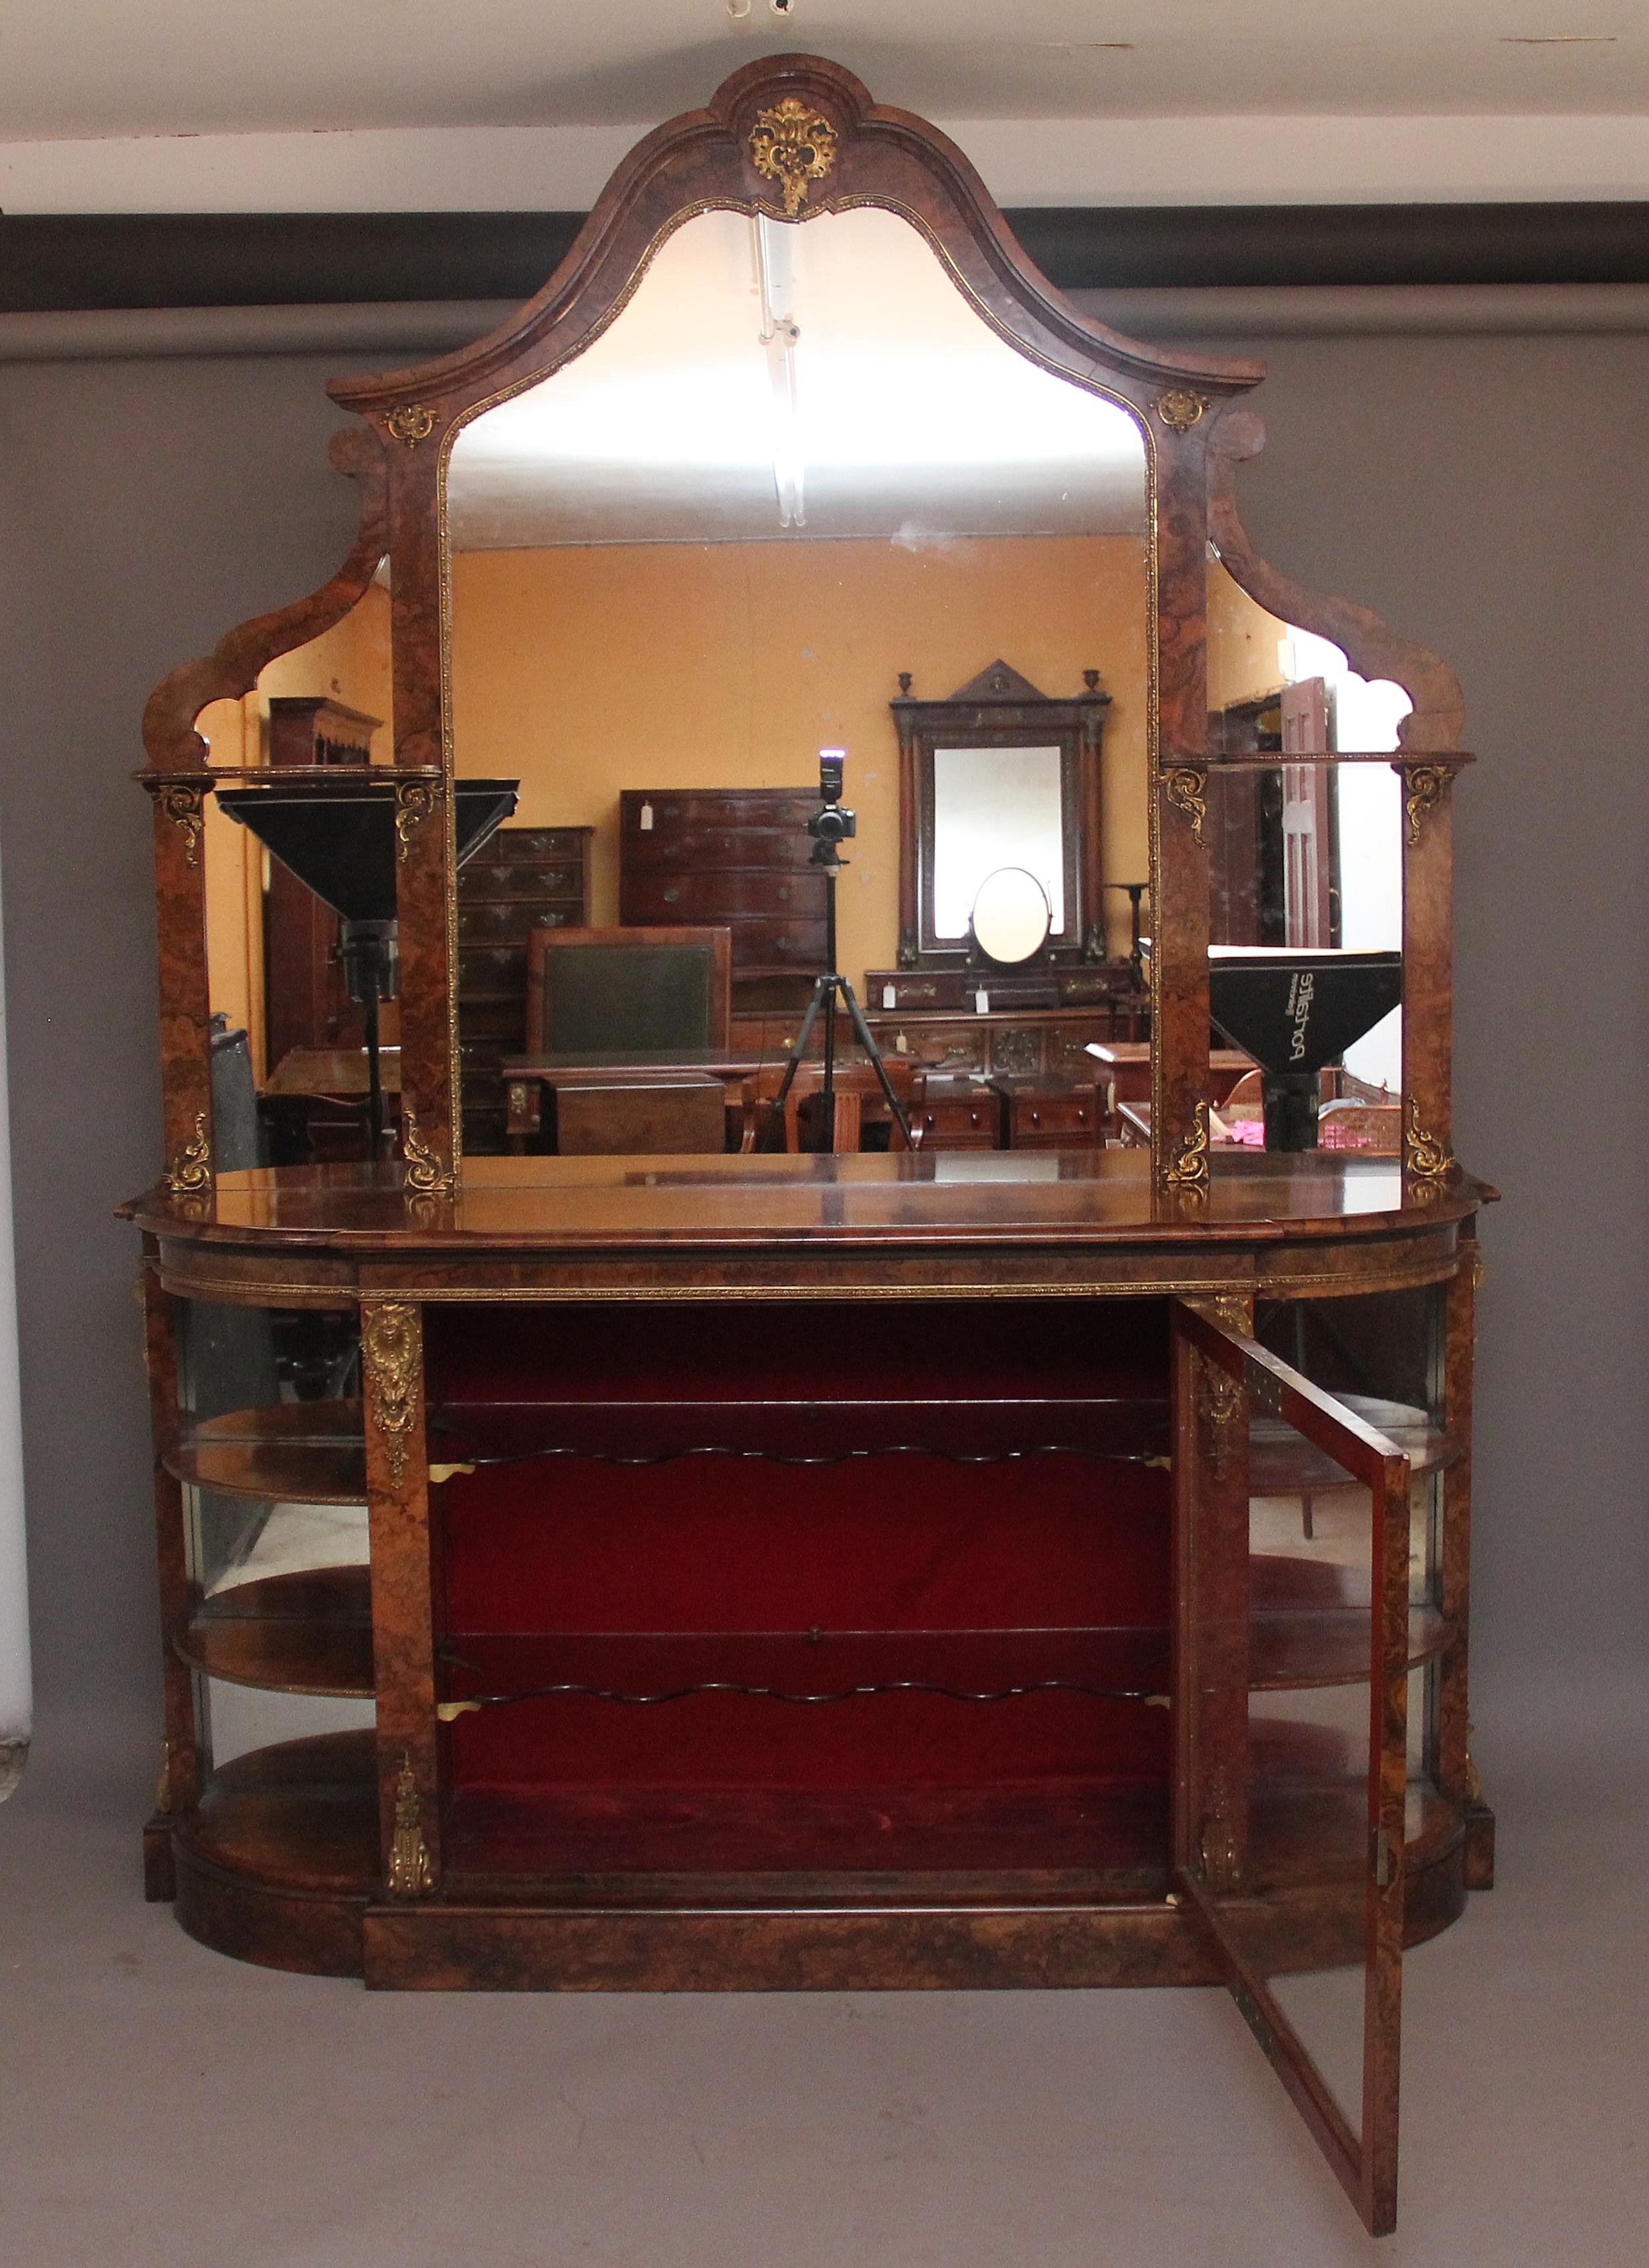 An exhibition quality 19th Century burr walnut mirror back credenza, the shaped mirror back top comprising of a large central mirror and two smaller mirrors either side, decorative arched top and shaped frame incorporating a large ormolu mount at